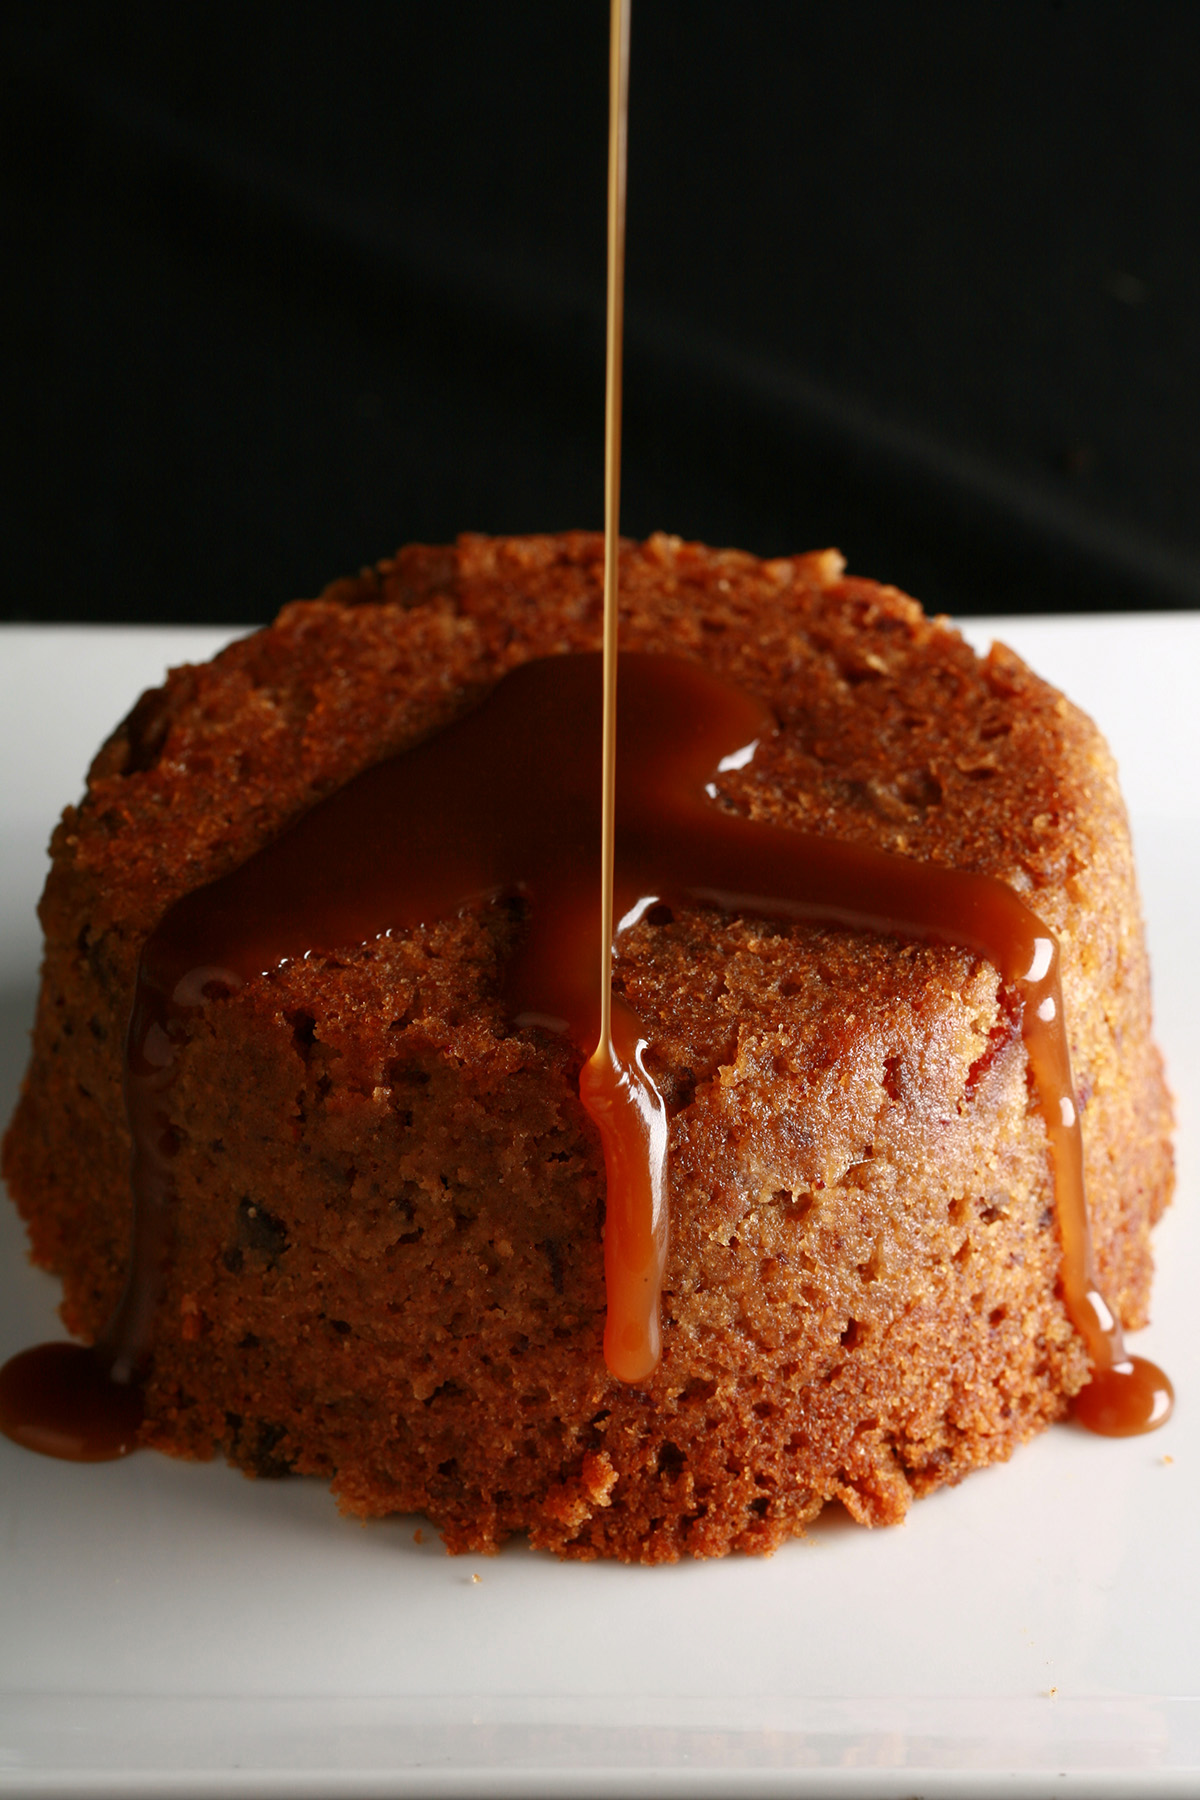 A gluten-free sticky toffee pudding with toffee sauce being poured over it.